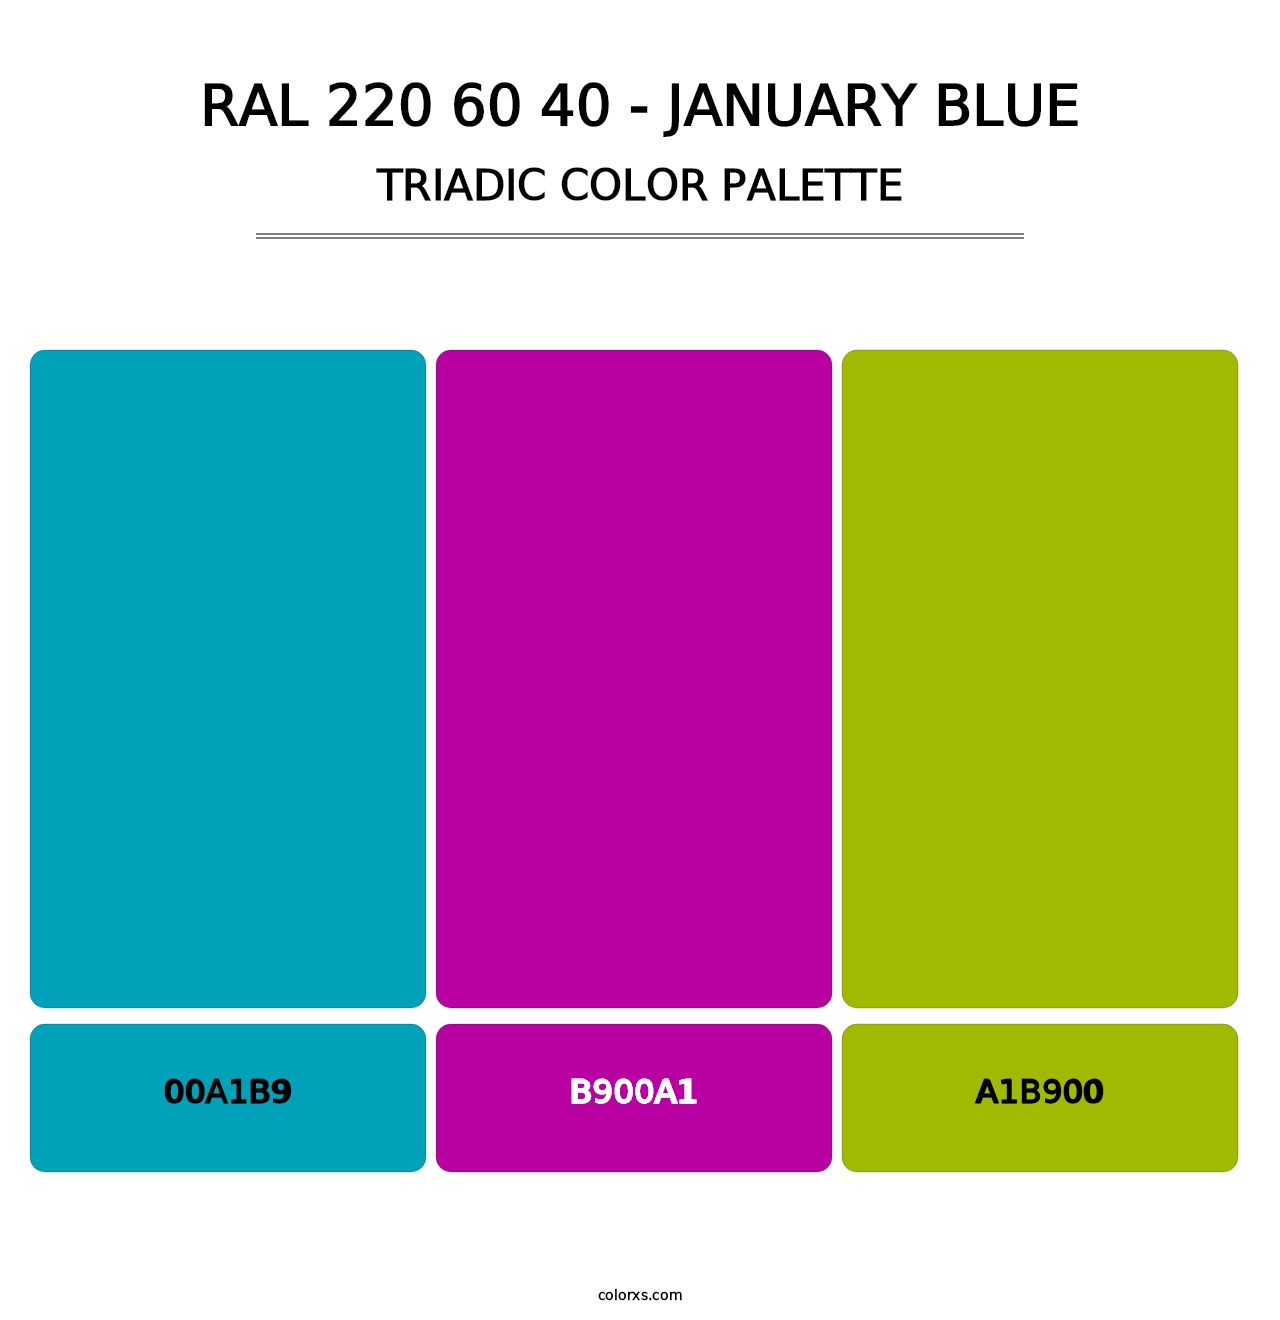 RAL 220 60 40 - January Blue - Triadic Color Palette